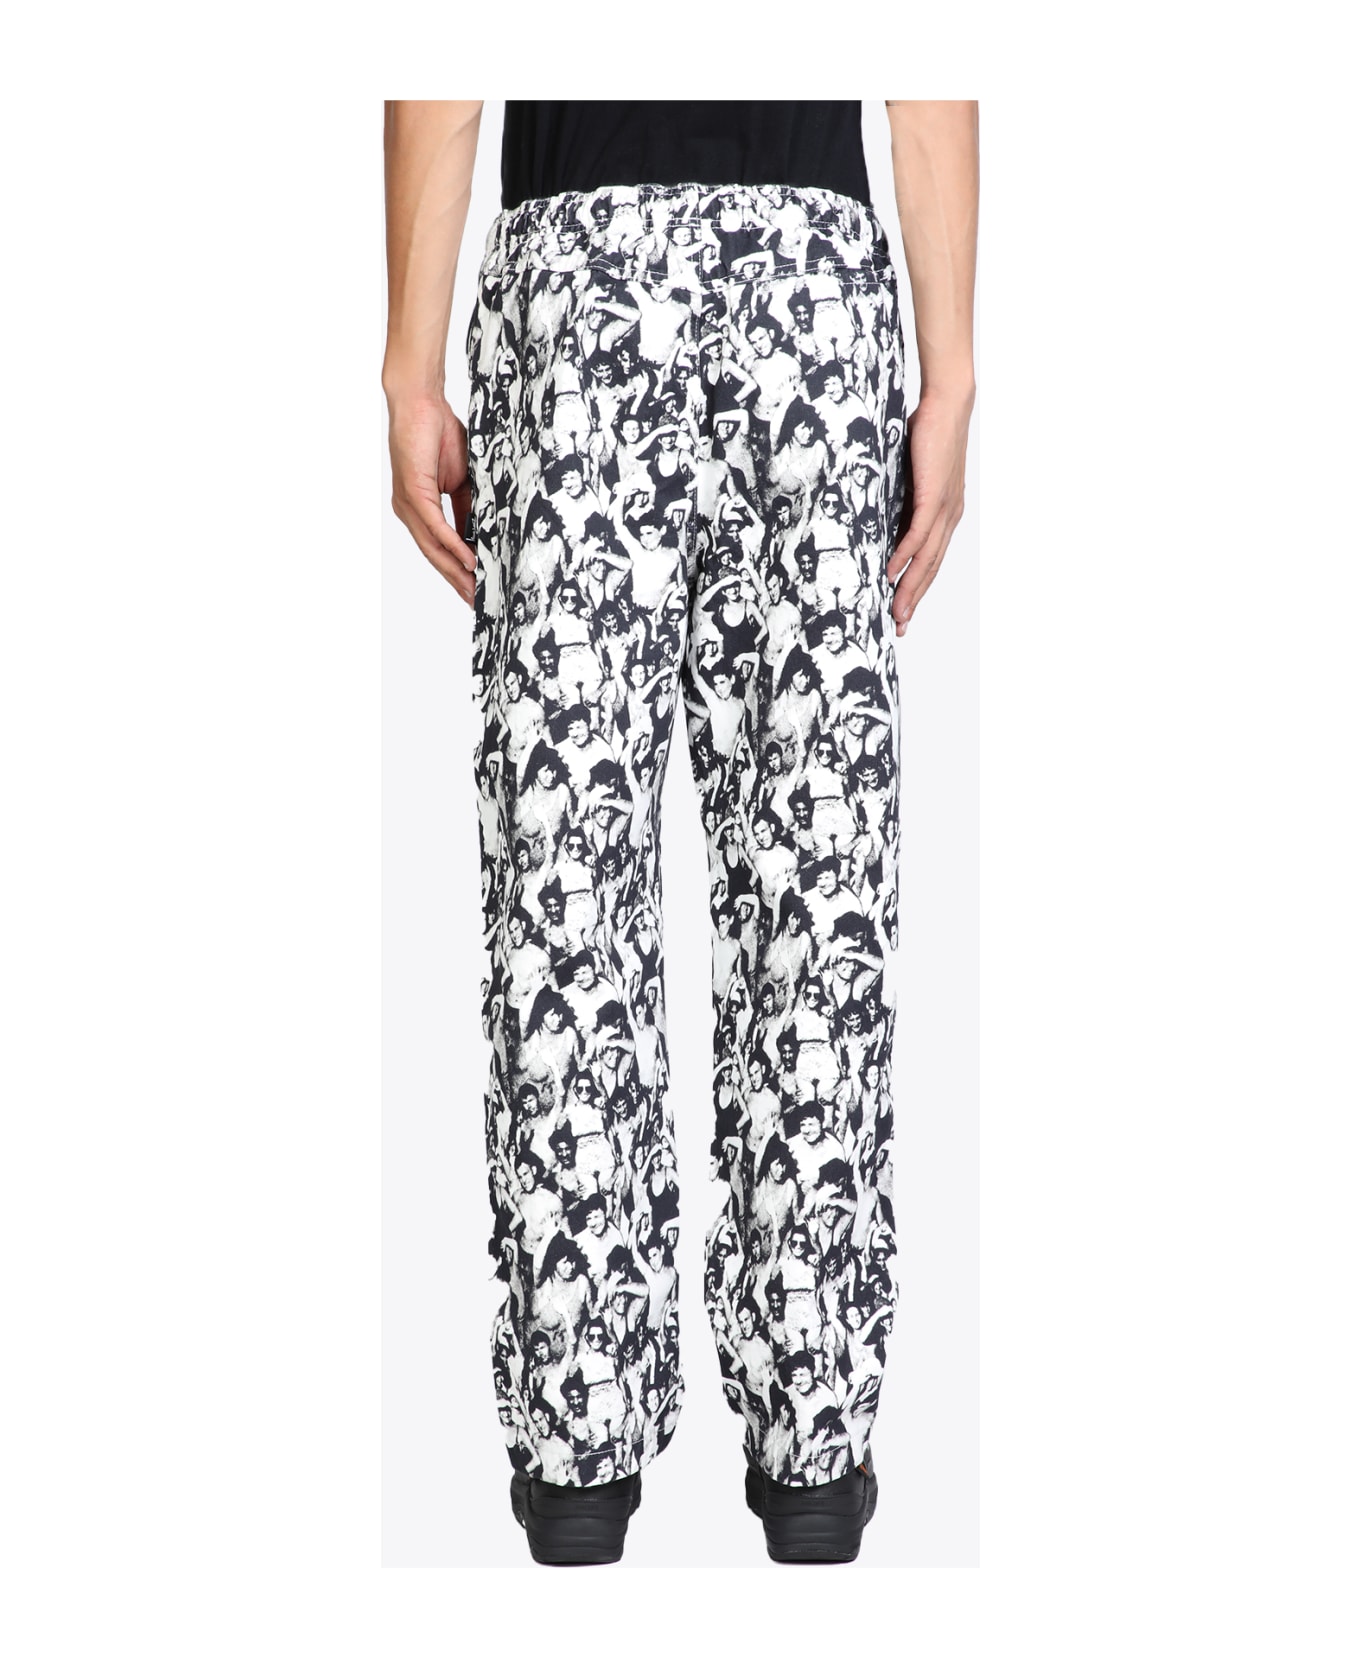 Stussy Mob Beach Pant Black And White All-over Printed Canvas Pant